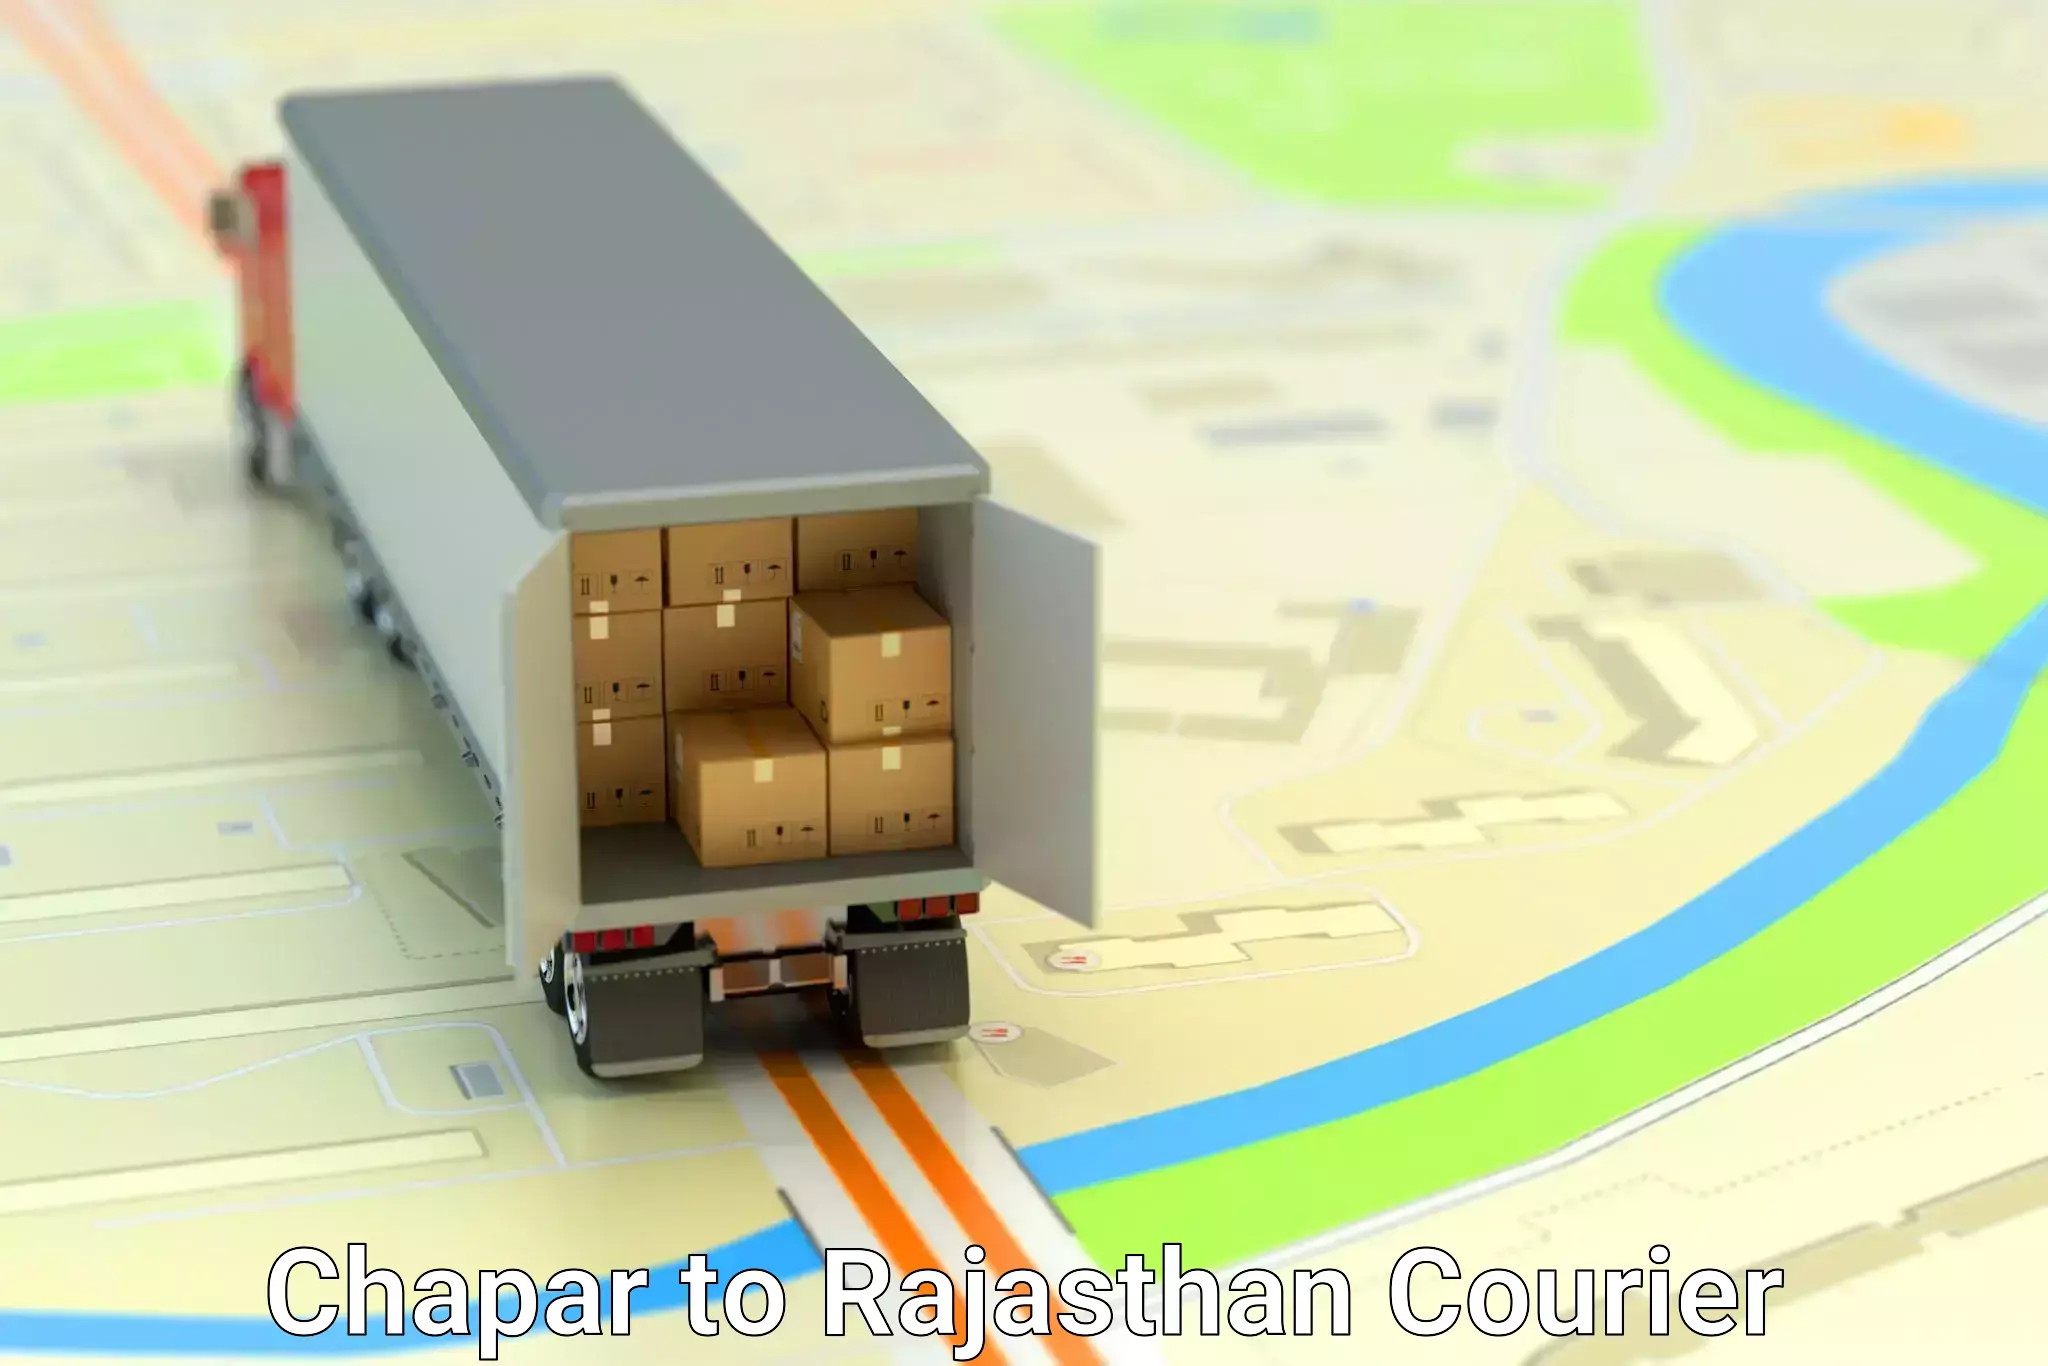 State-of-the-art courier technology in Chapar to Rajasthan